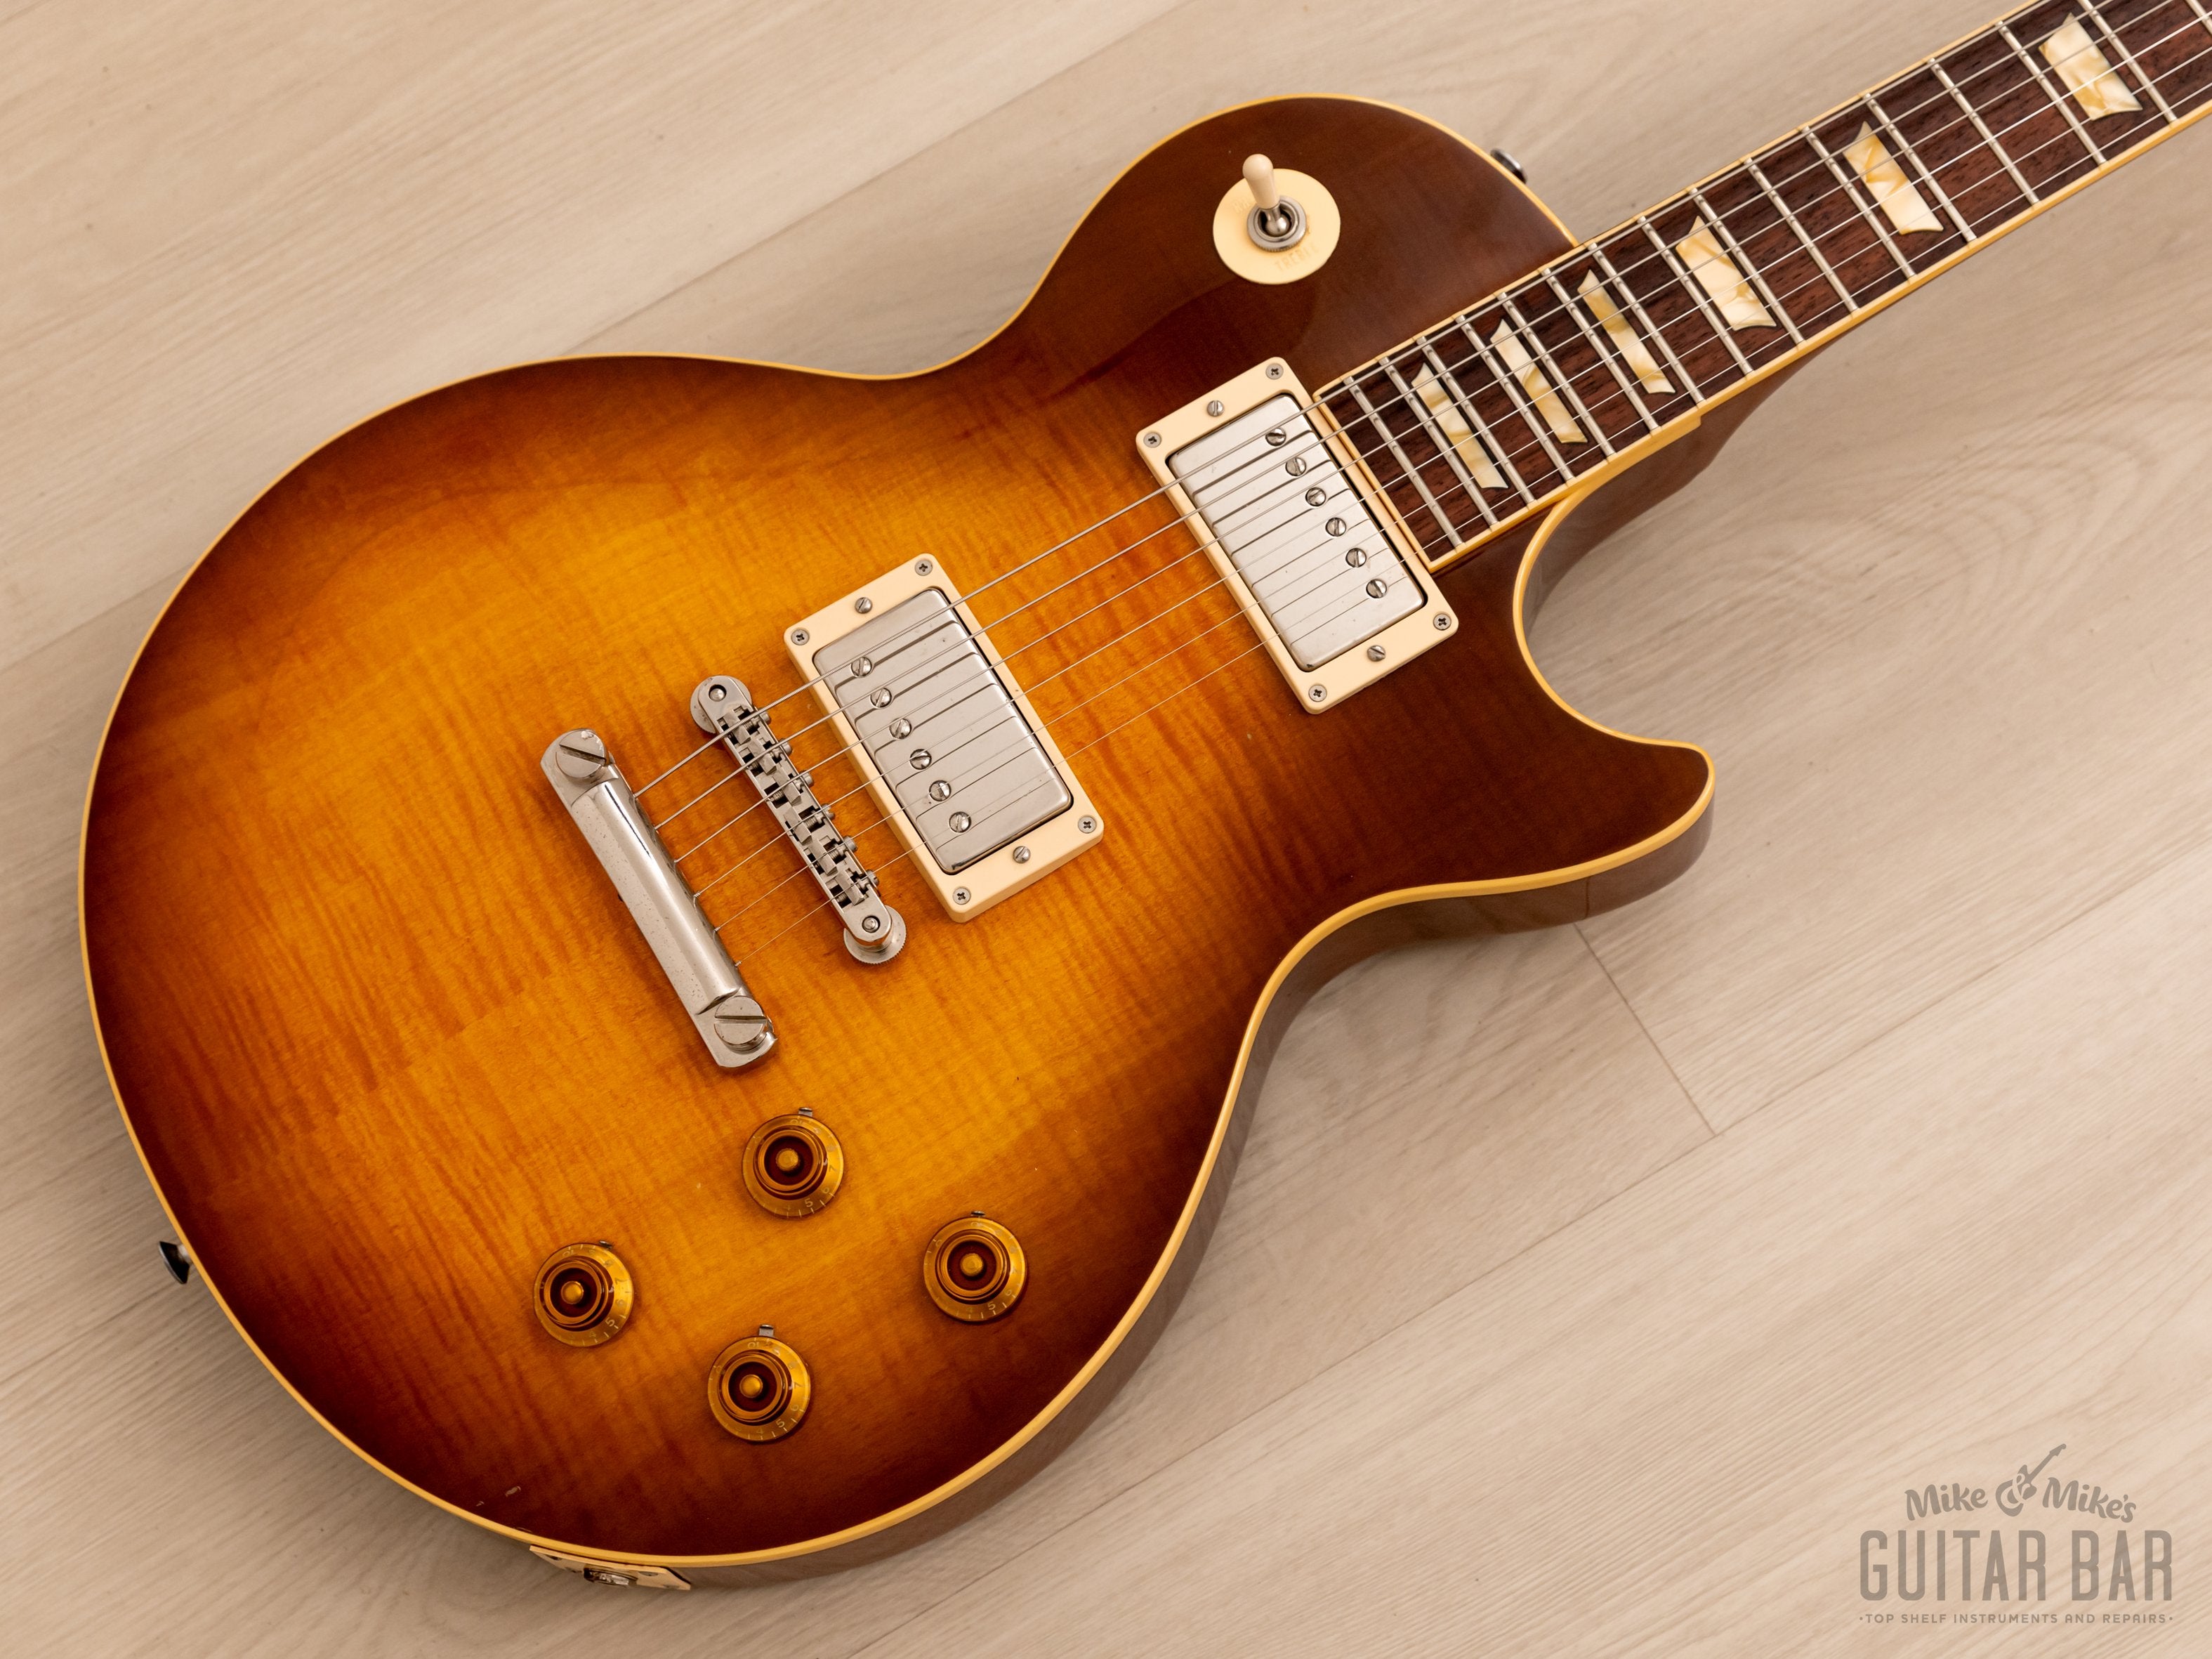 1993 Orville by Gibson Les Paul Standard LPS-59R Honey Burst w/ 57 Classic PAFs, Case